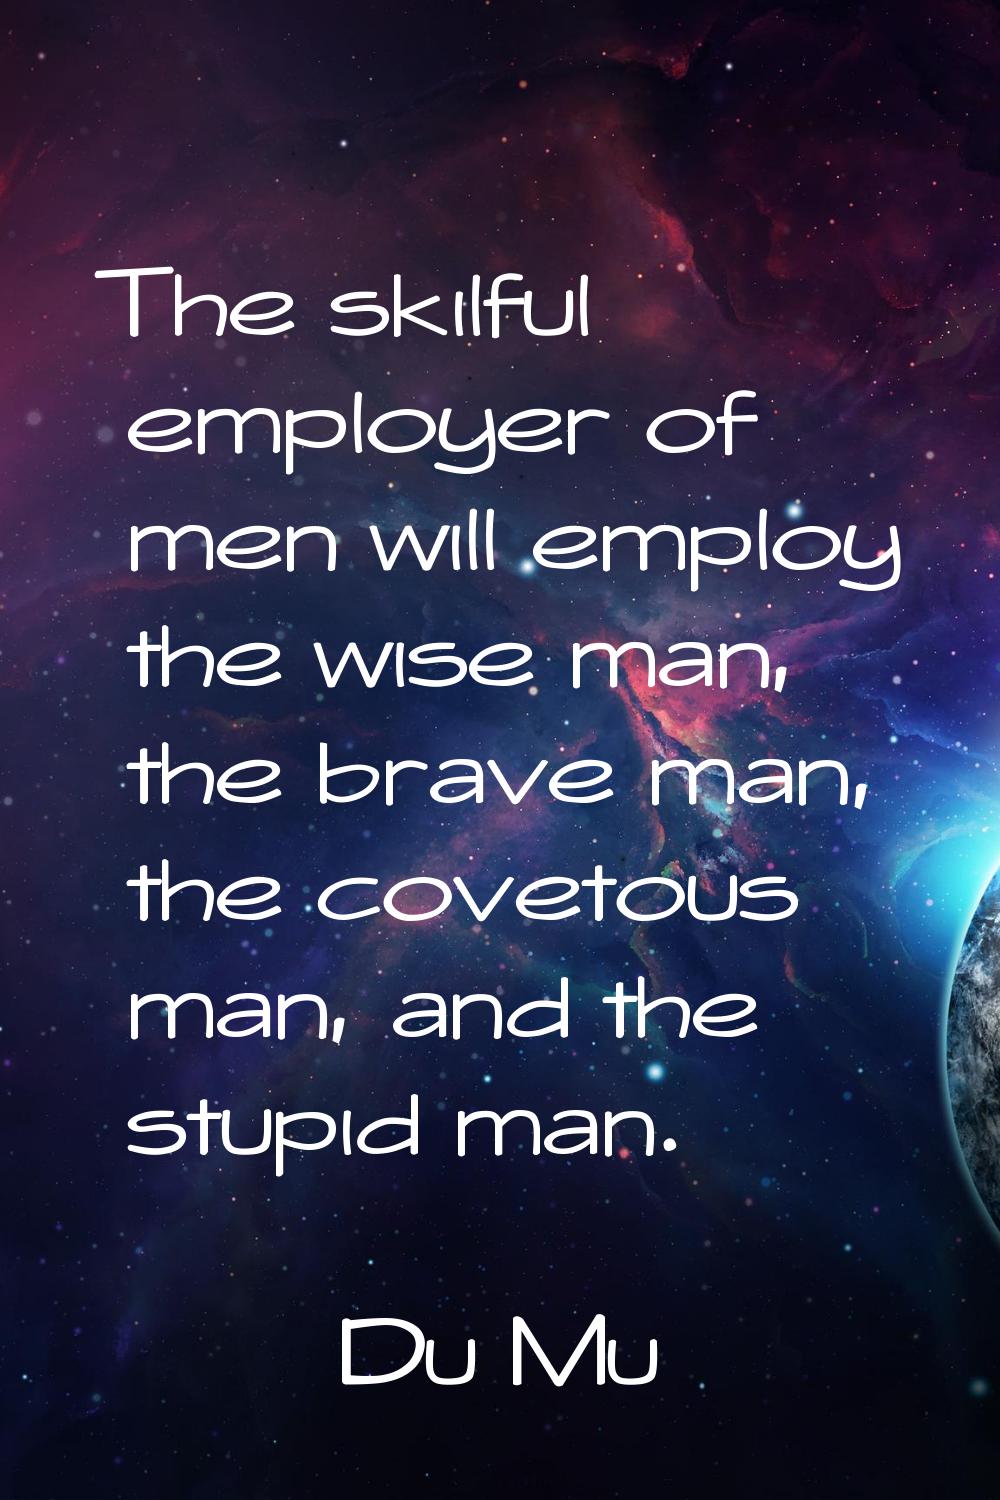 The skilful employer of men will employ the wise man, the brave man, the covetous man, and the stup